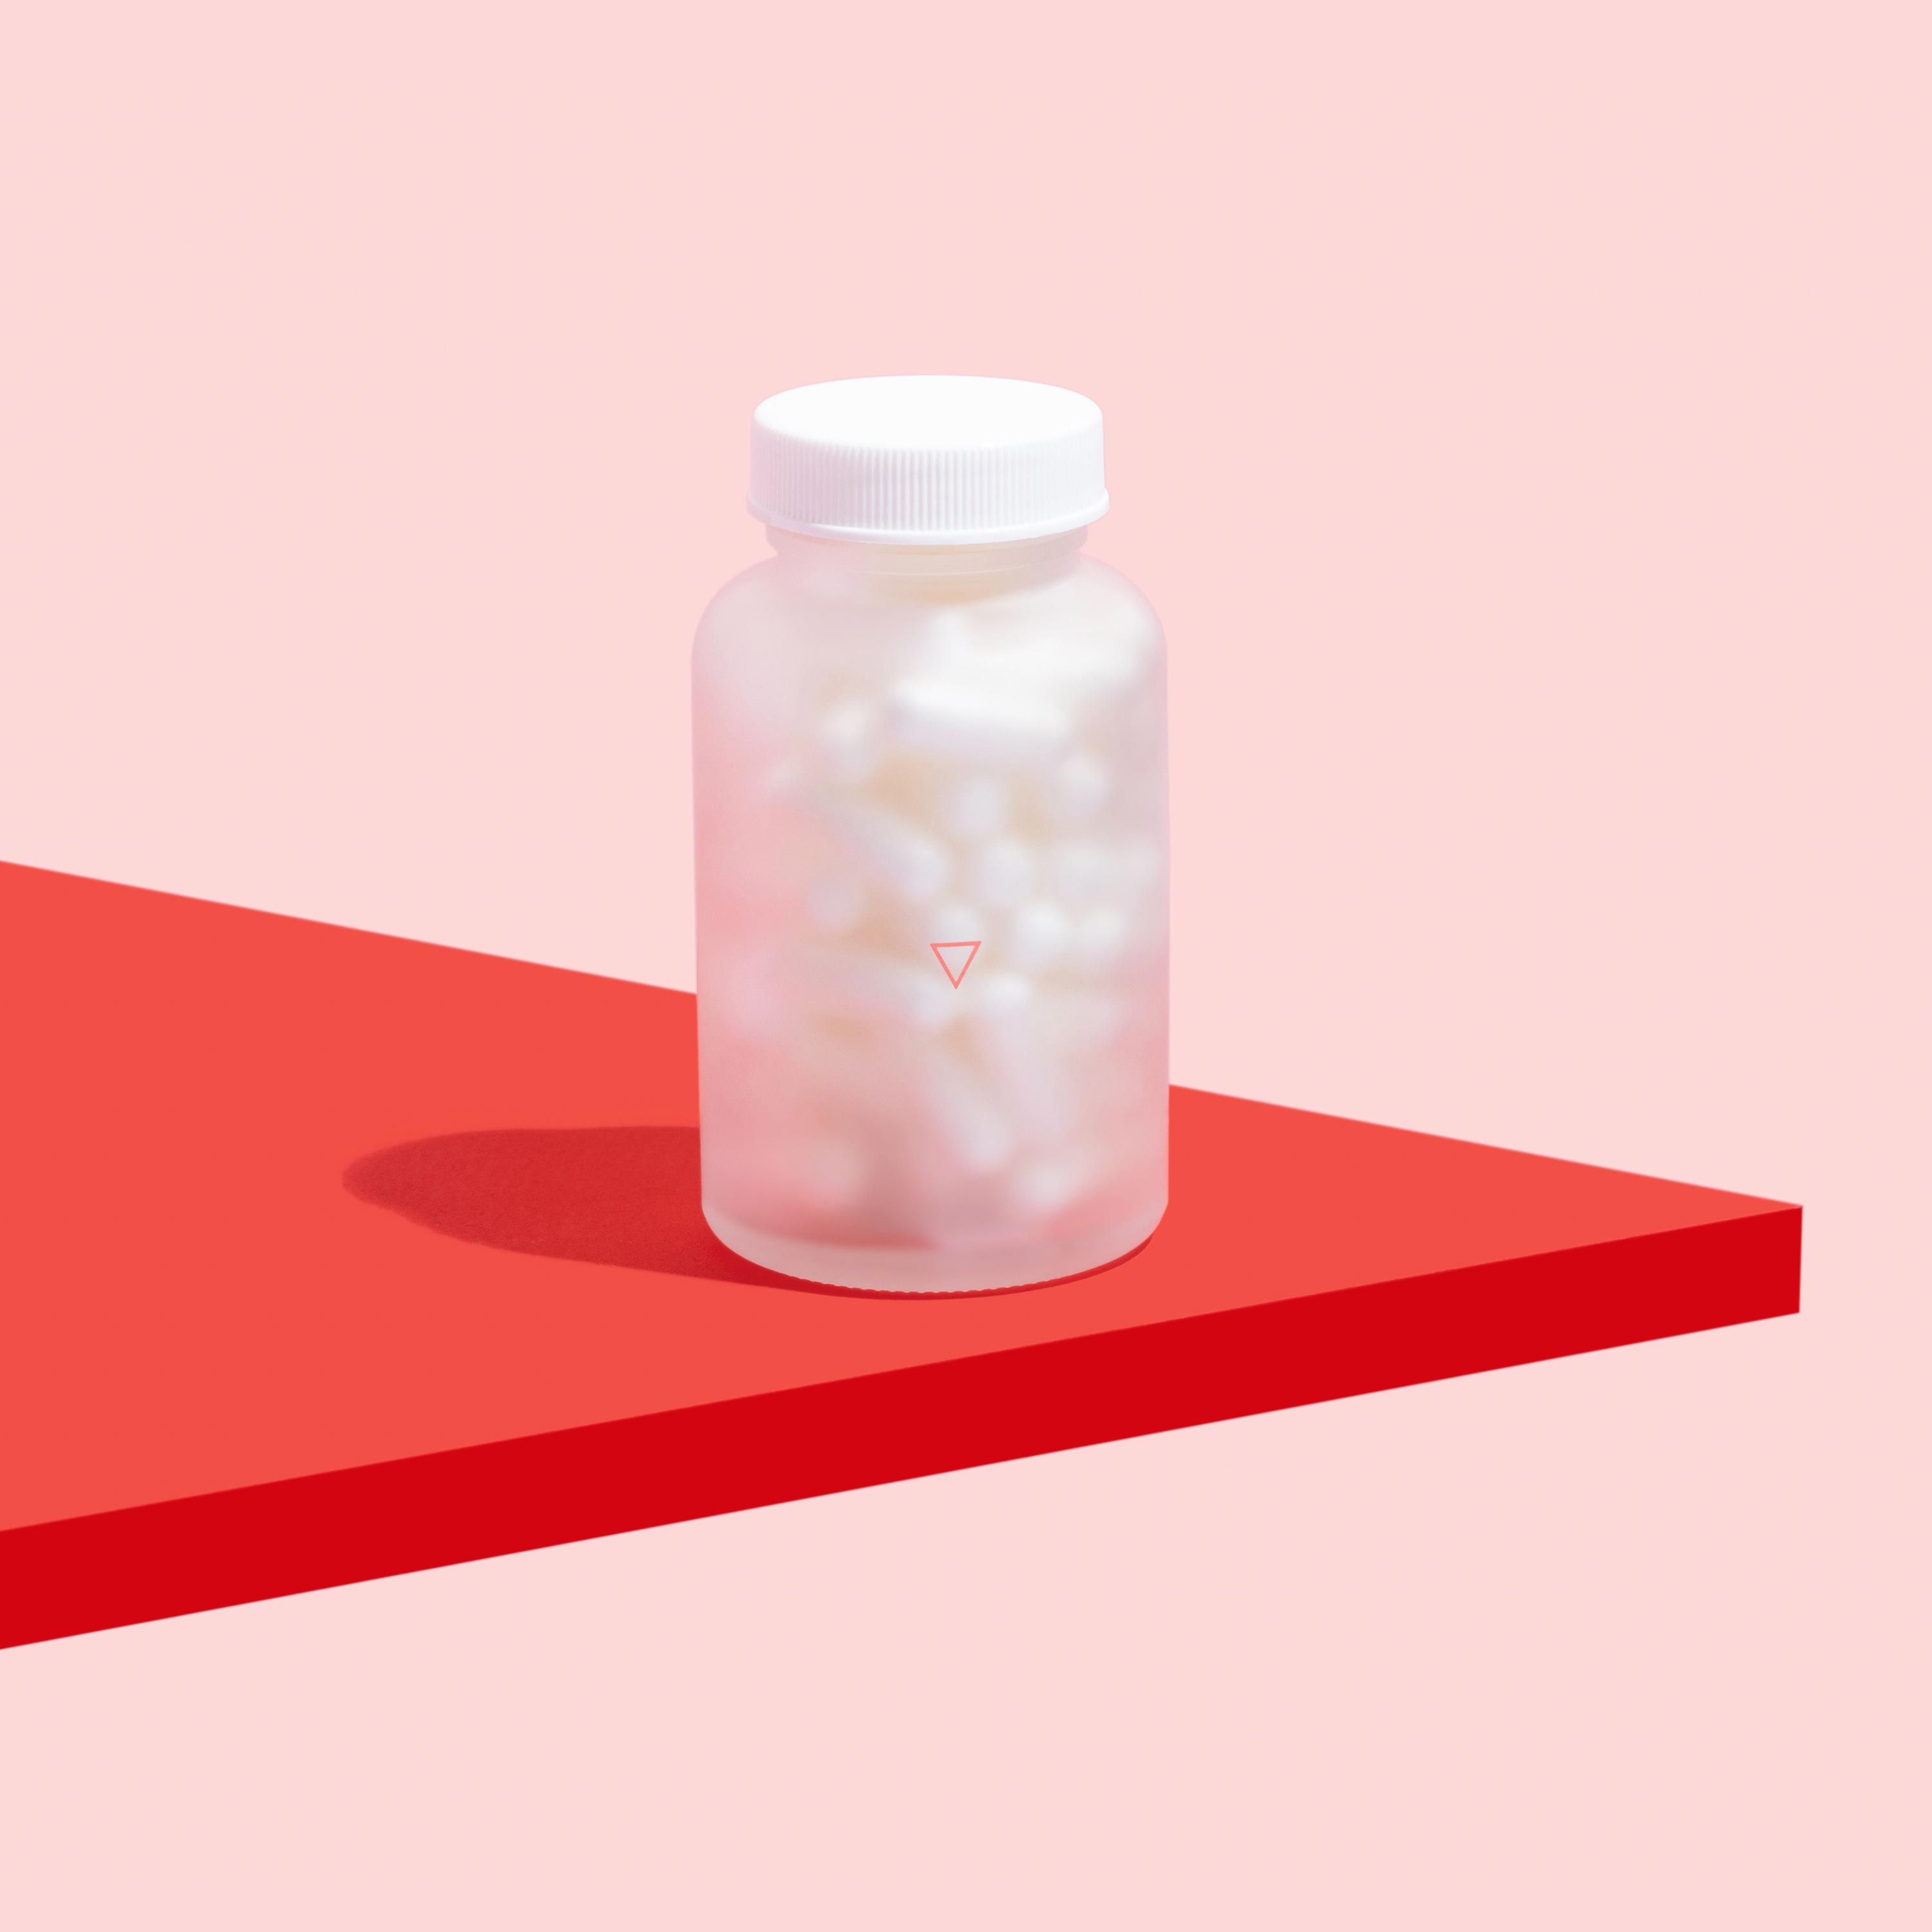 Bottle of Valacyclovir to treat oral and genital herpes outbreaks on a red surface, on a pink background